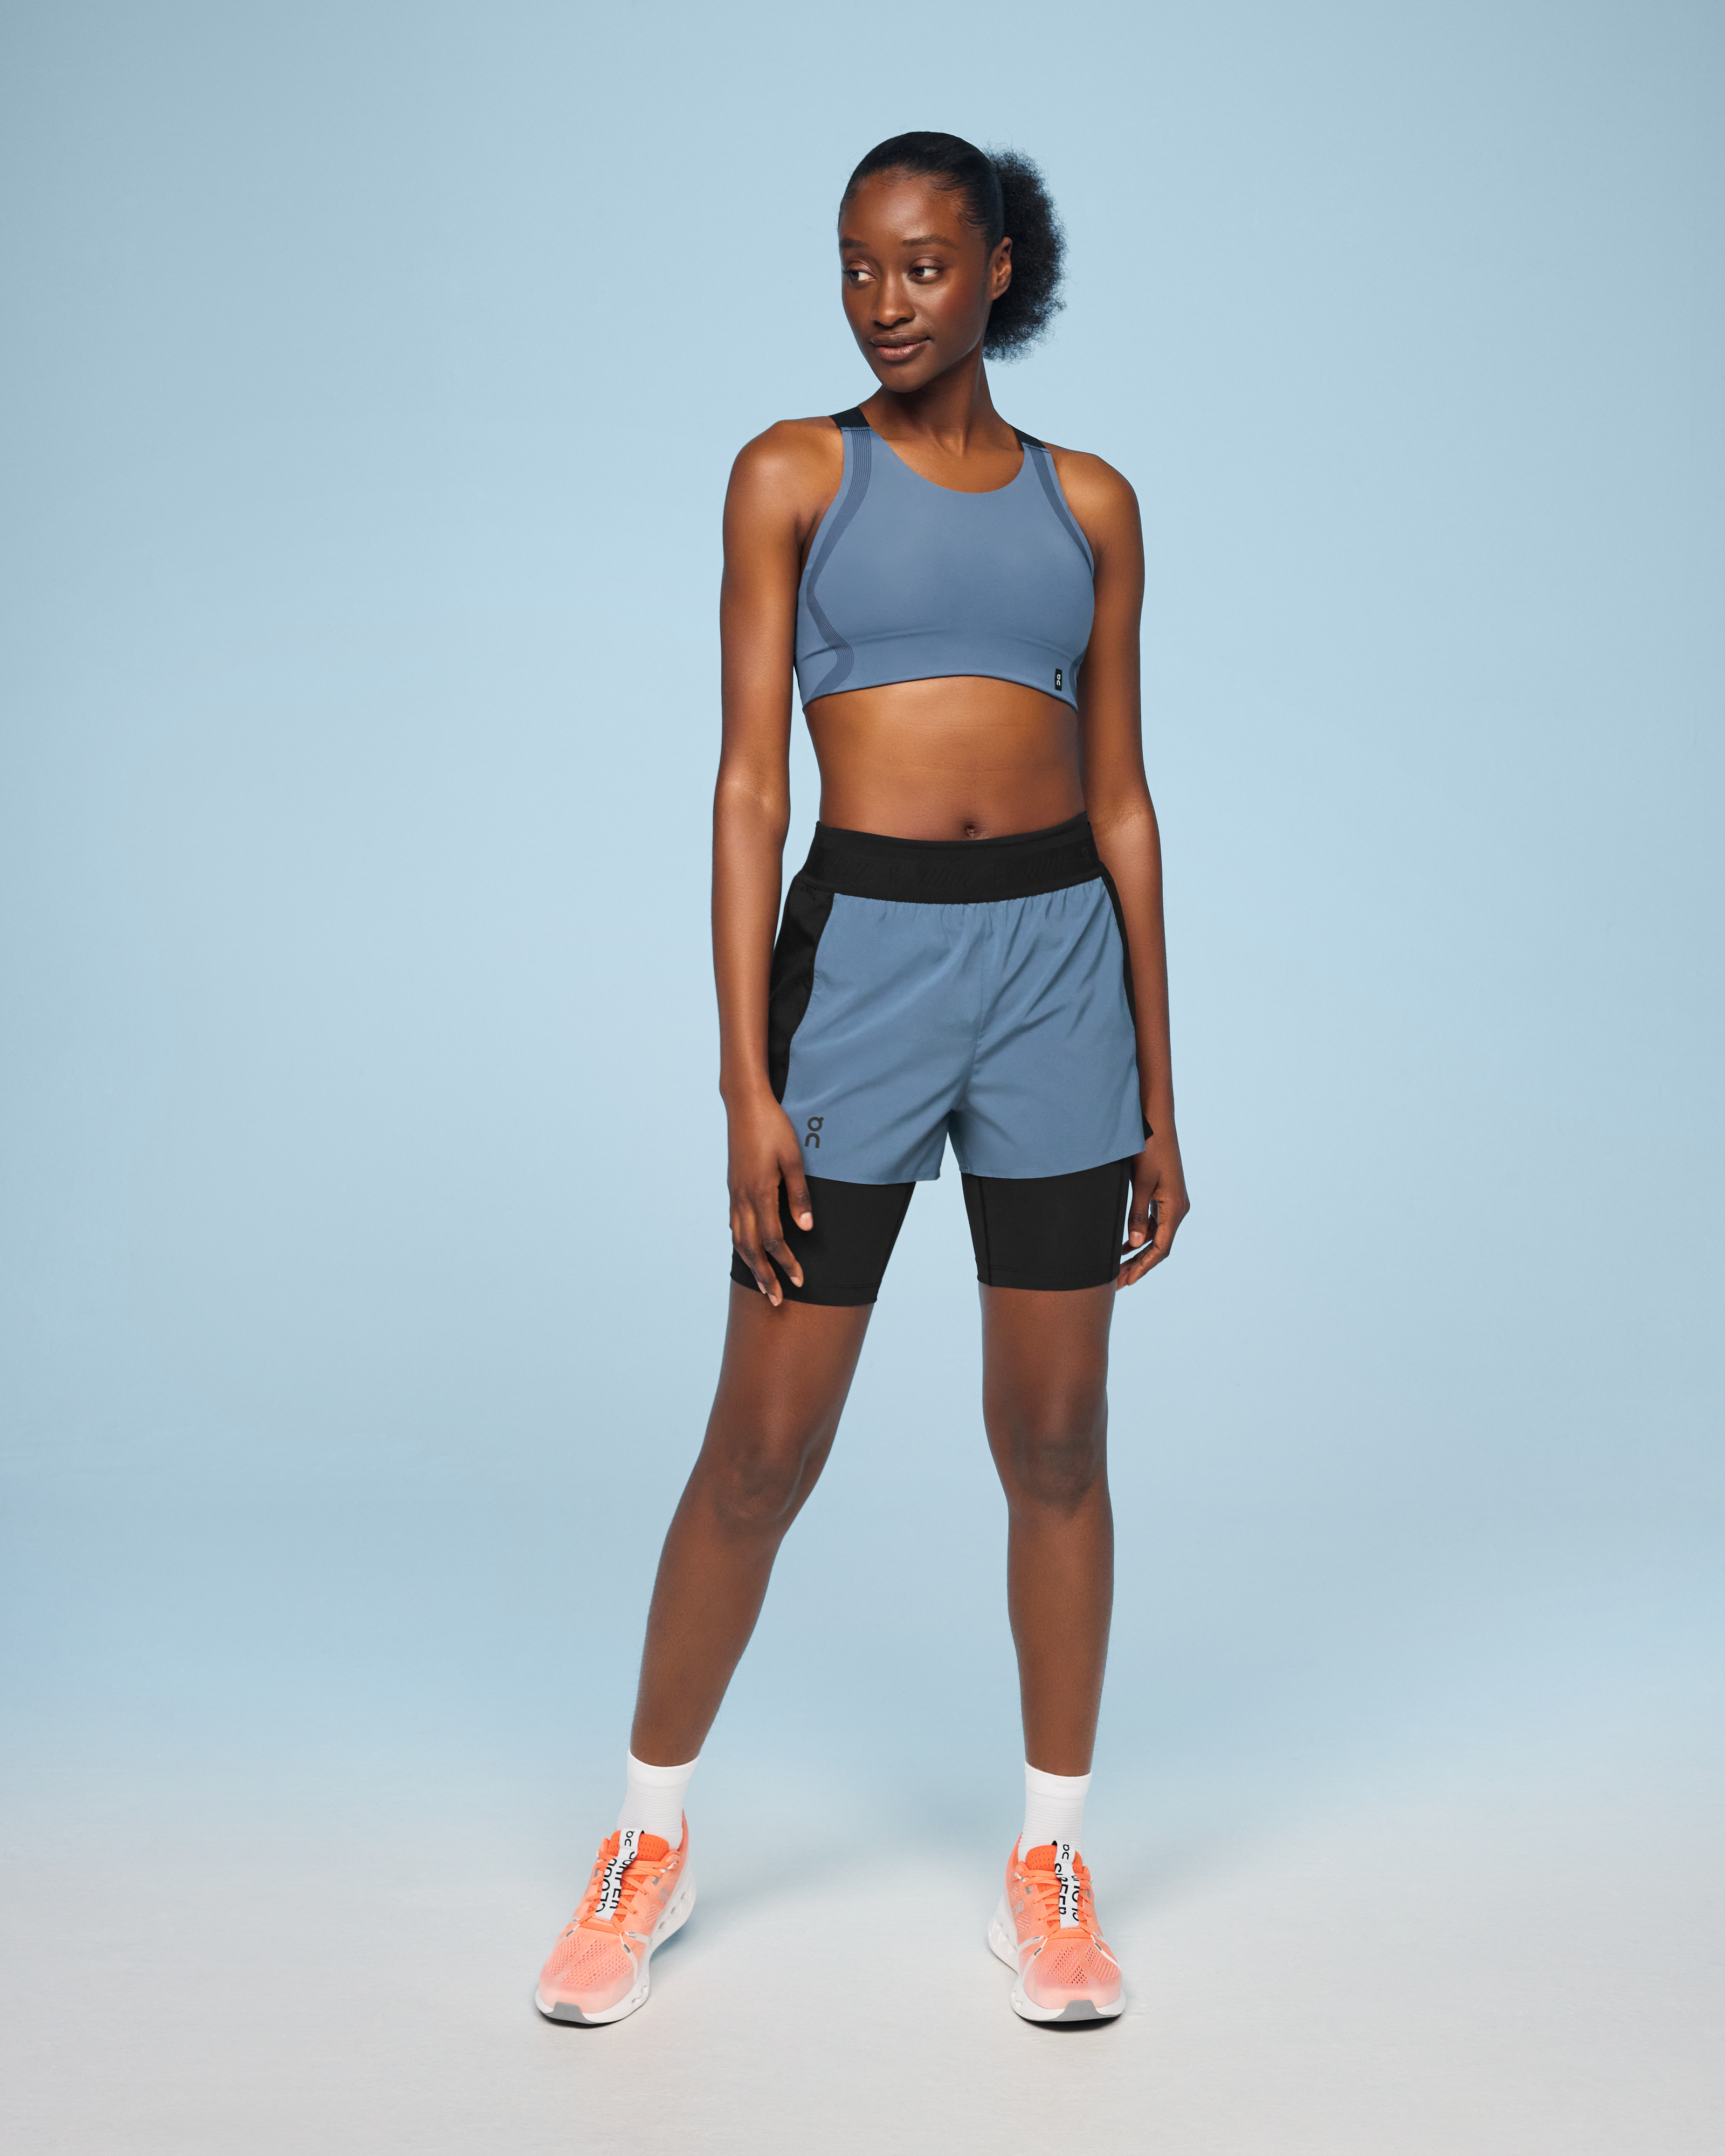 Active Shorts: Two-in-one Shorts for Running or Workout